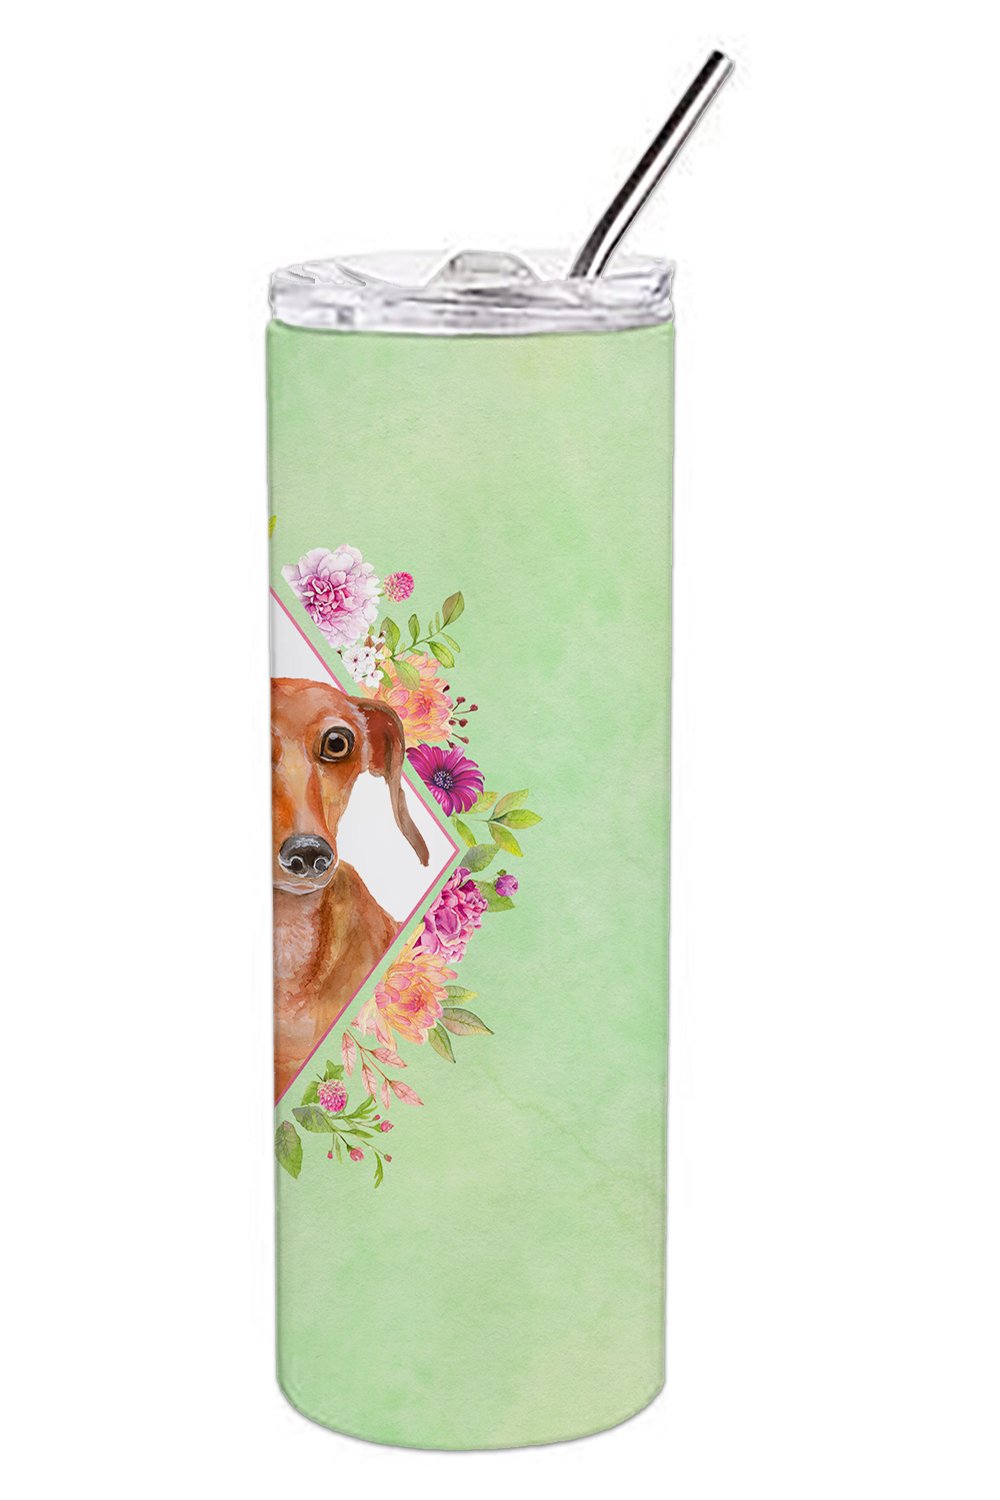 Dachshund Red #2 Green Flowers Double Walled Stainless Steel 20 oz Skinny Tumbler CK4295TBL20 by Caroline's Treasures